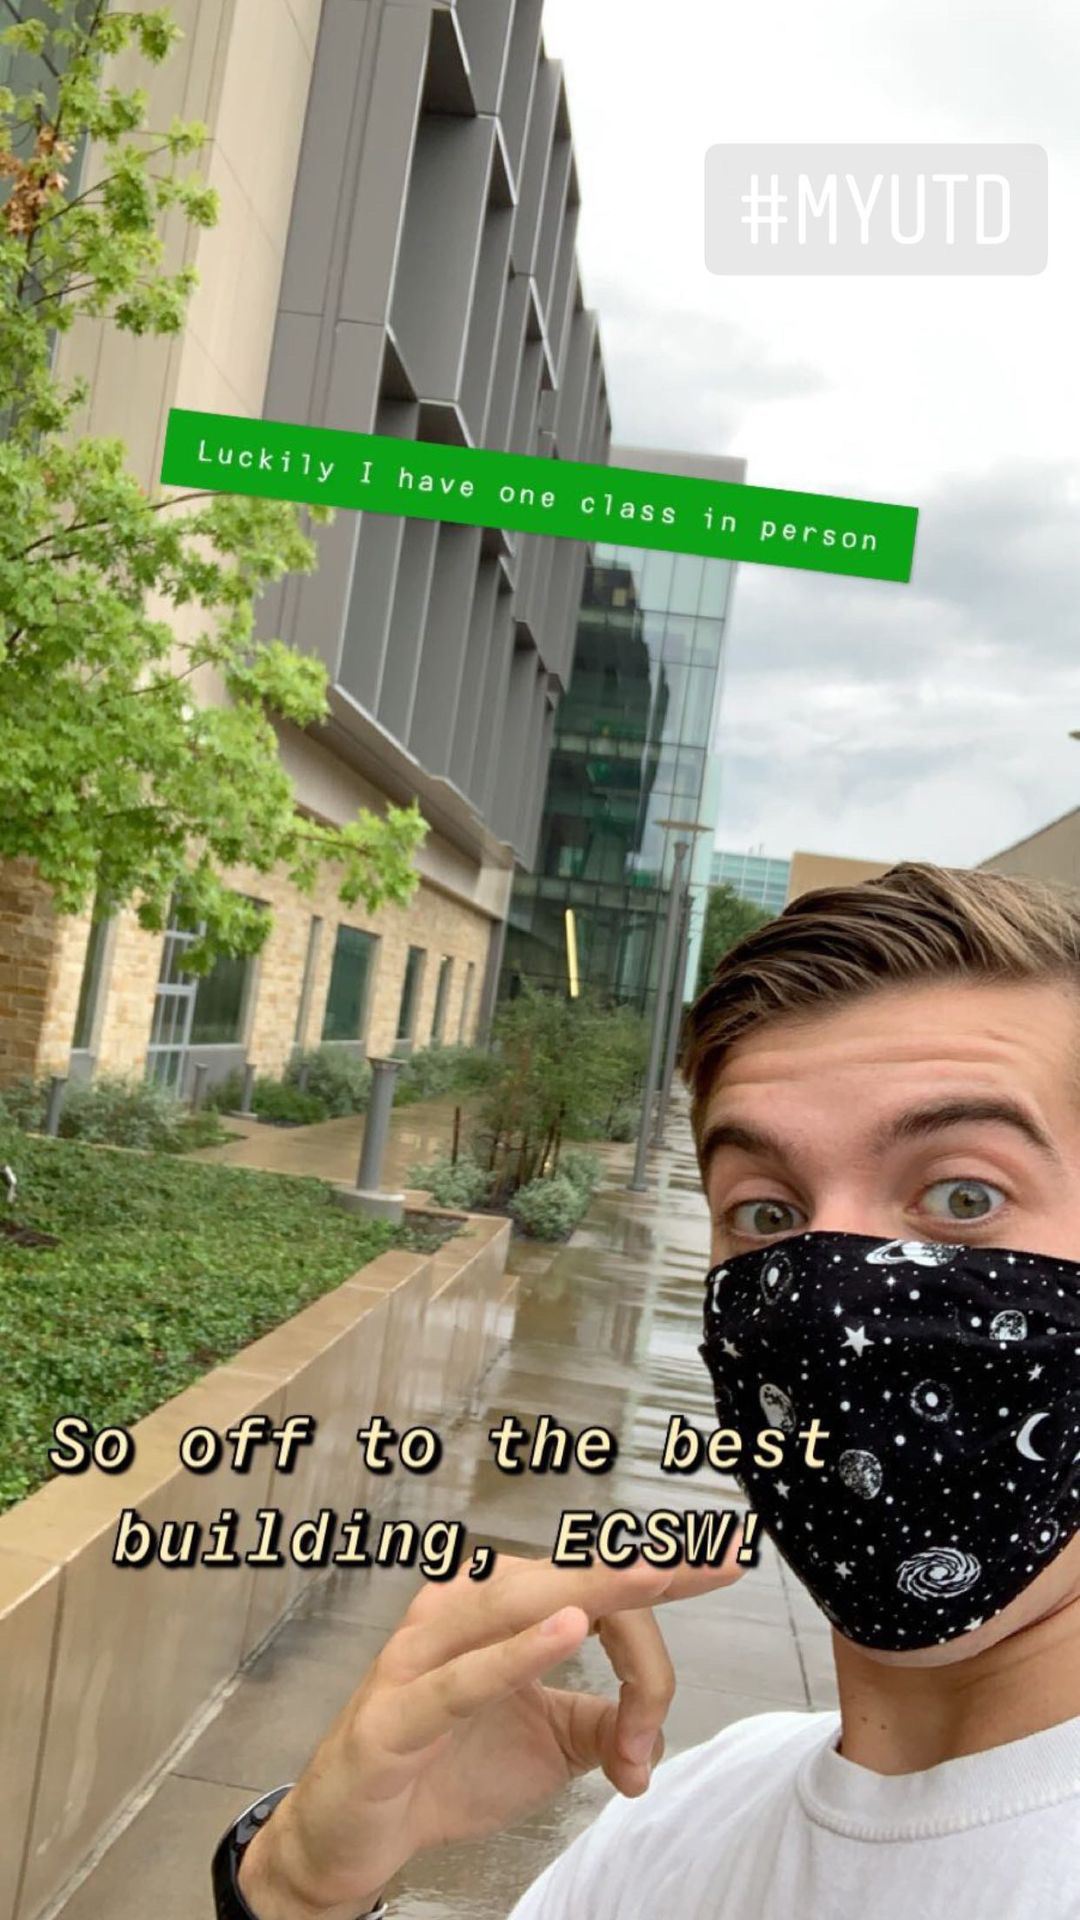 A Trent selfie. A campus building and wet sidewalk is behind him. He's doing a mini whoosh hand sign.